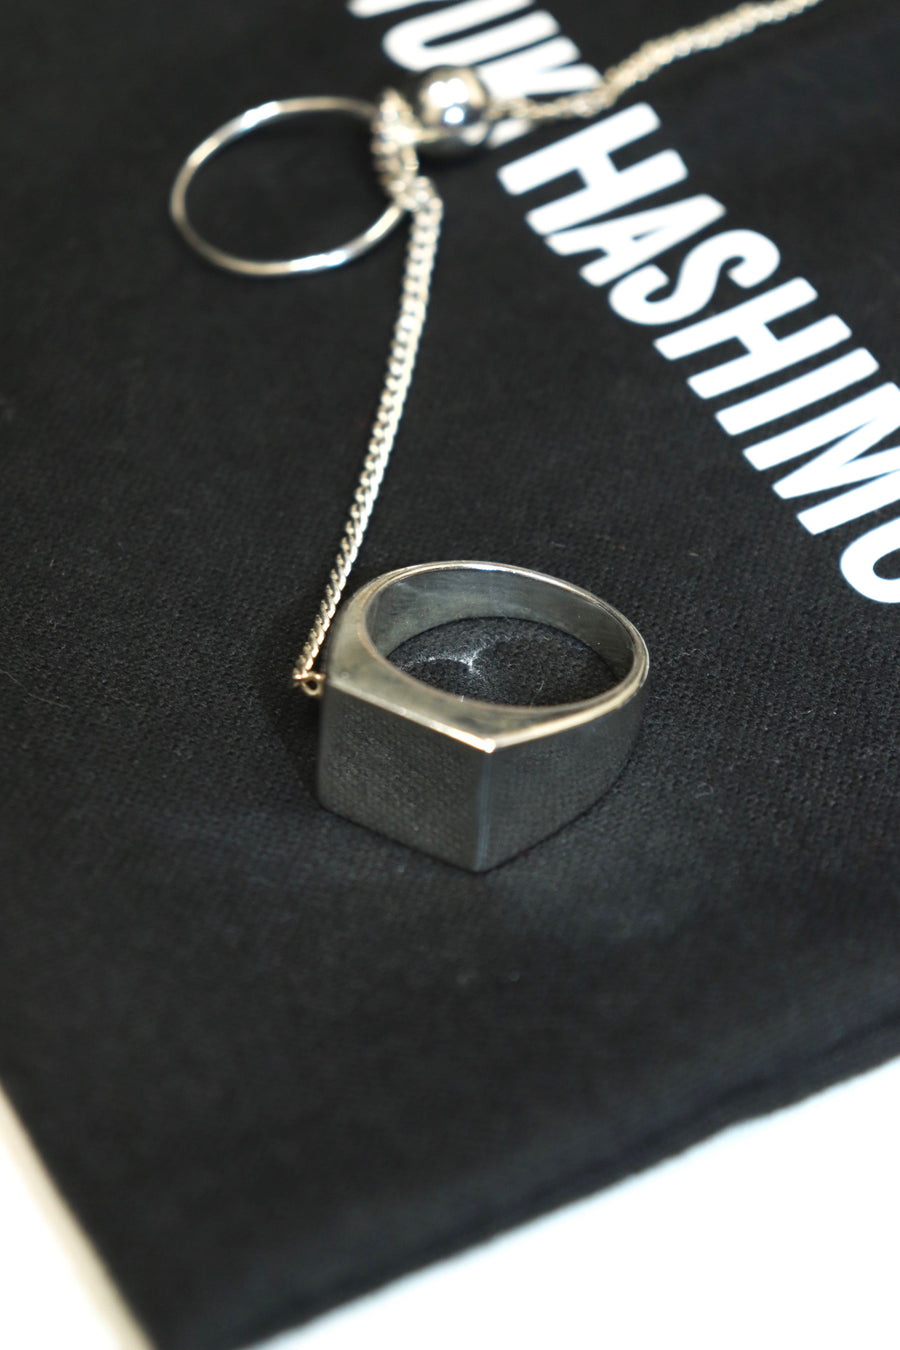 YUKI HASHIMOTO × P.A.A  household rings top neckless 2